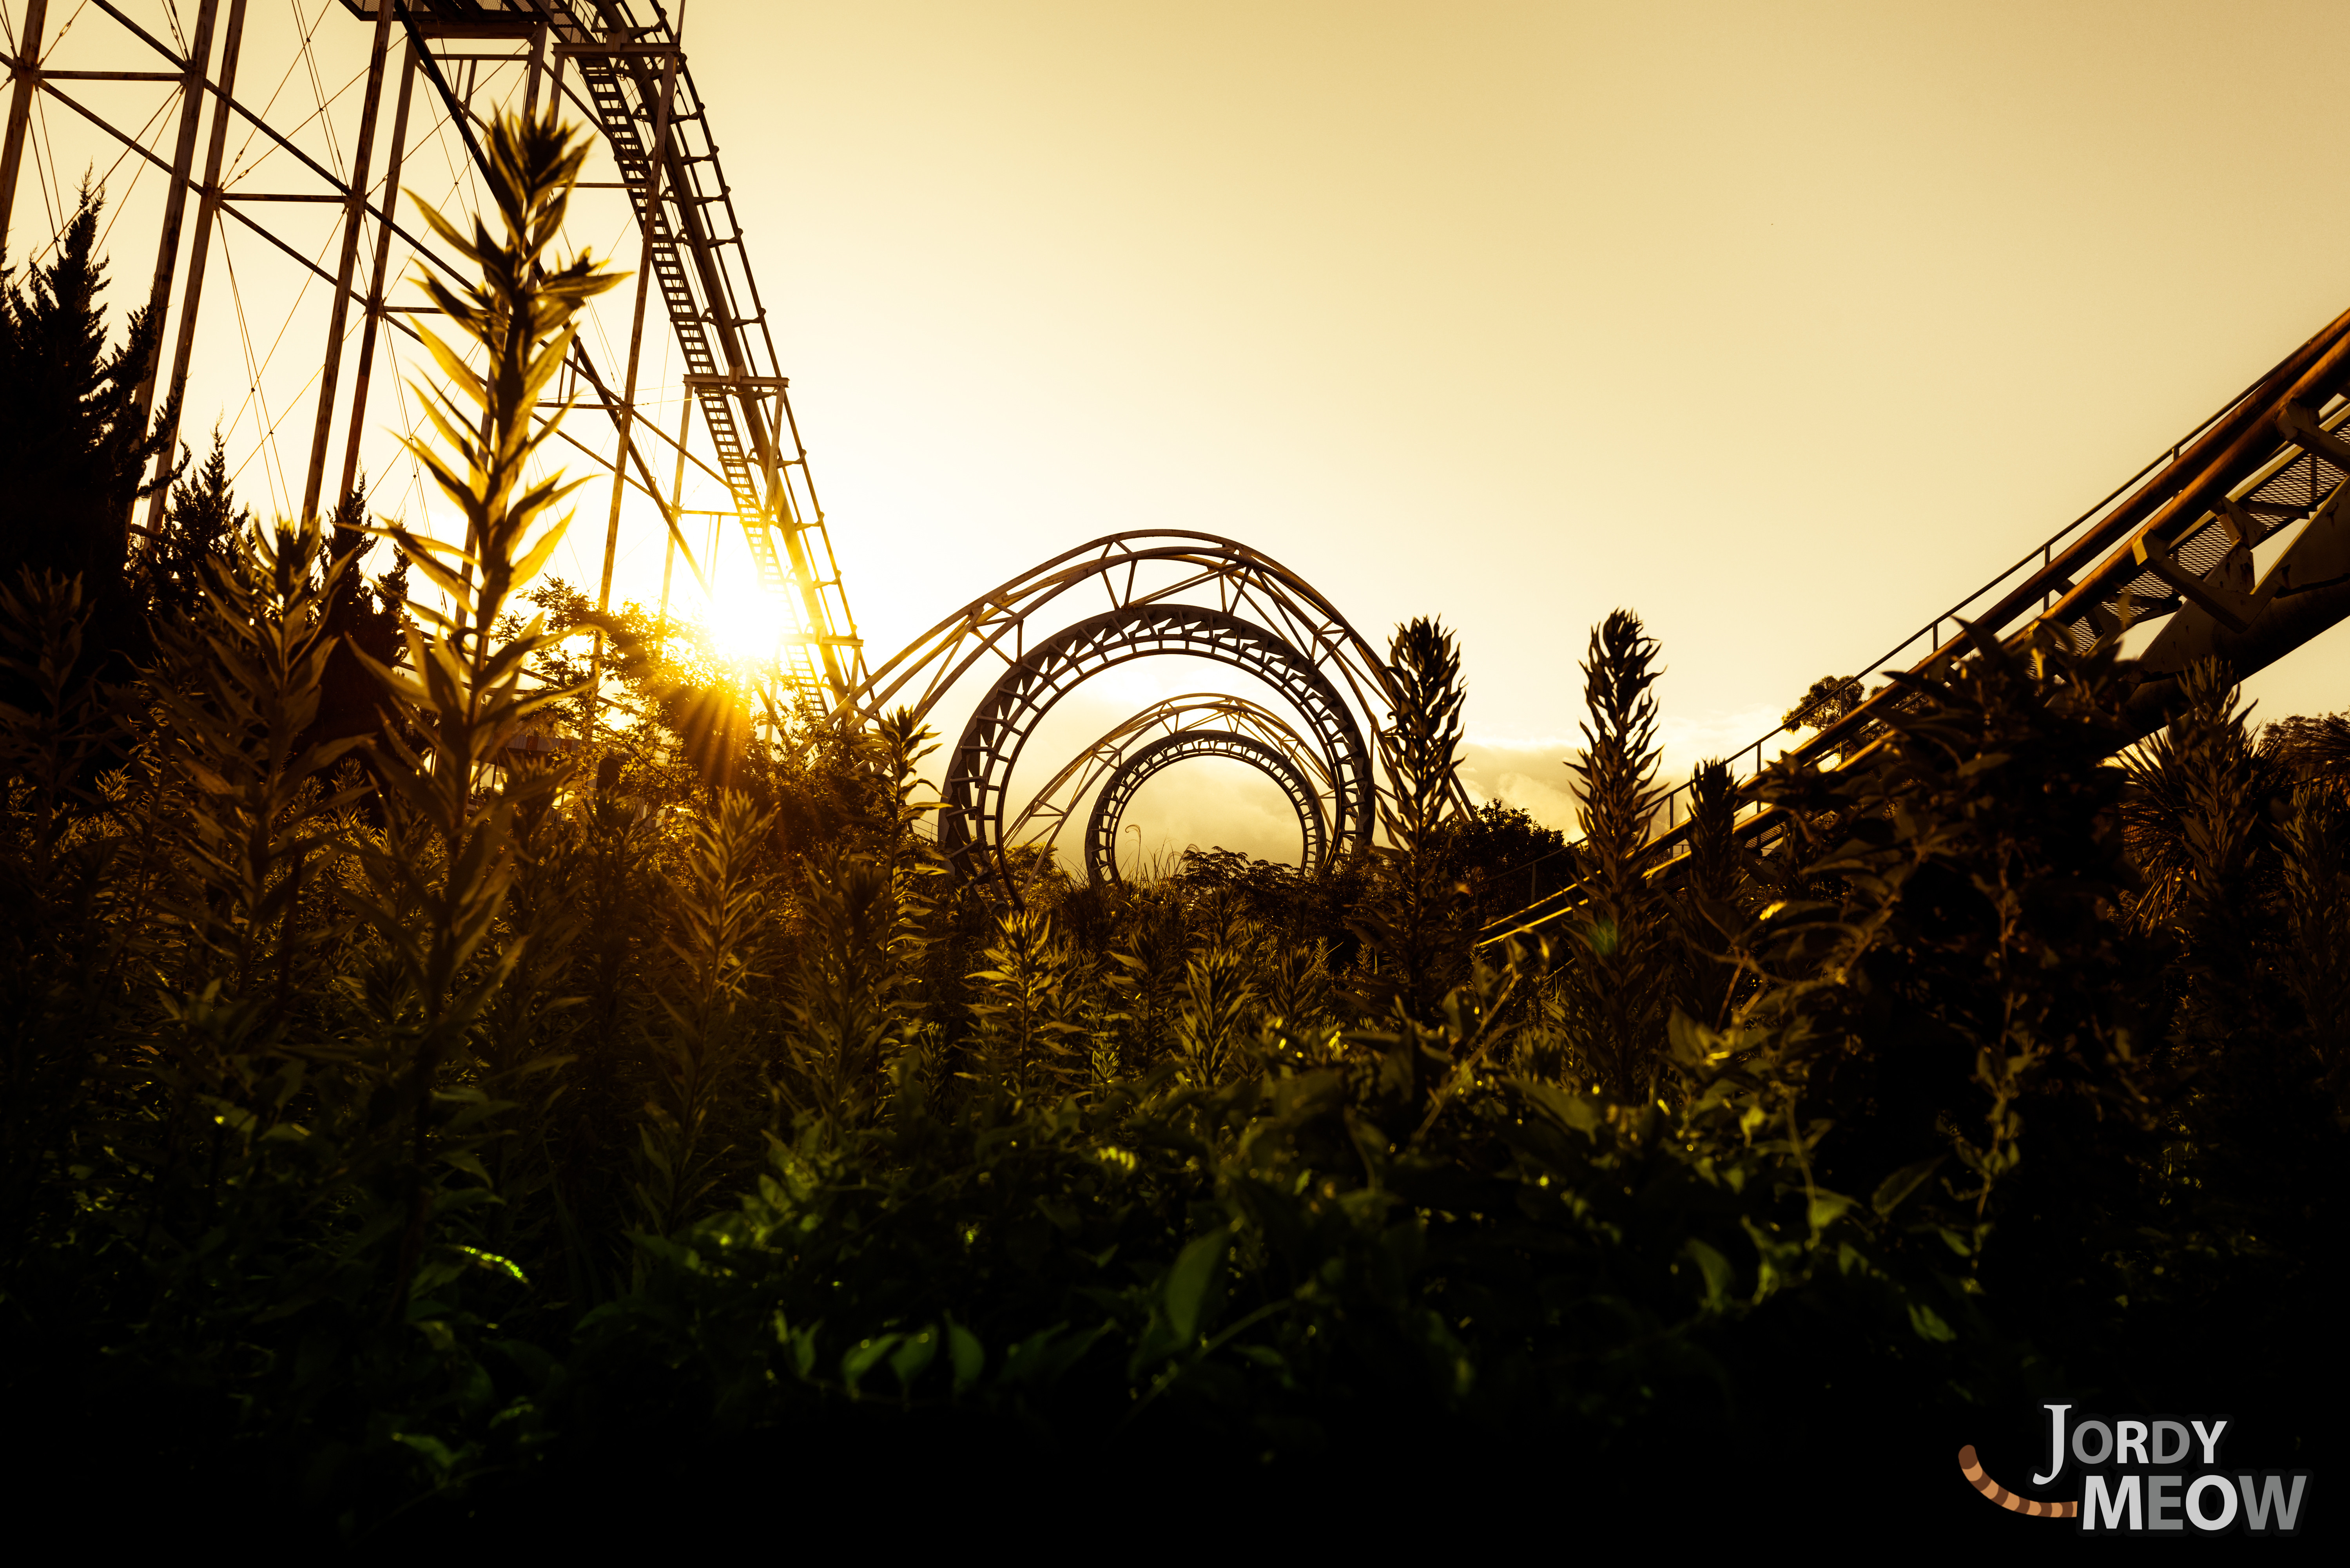 Deep in the weeds: Nara Dreamland's wooden rollercoaster is surrounded by dense undergrowth. | JORDY MEOW